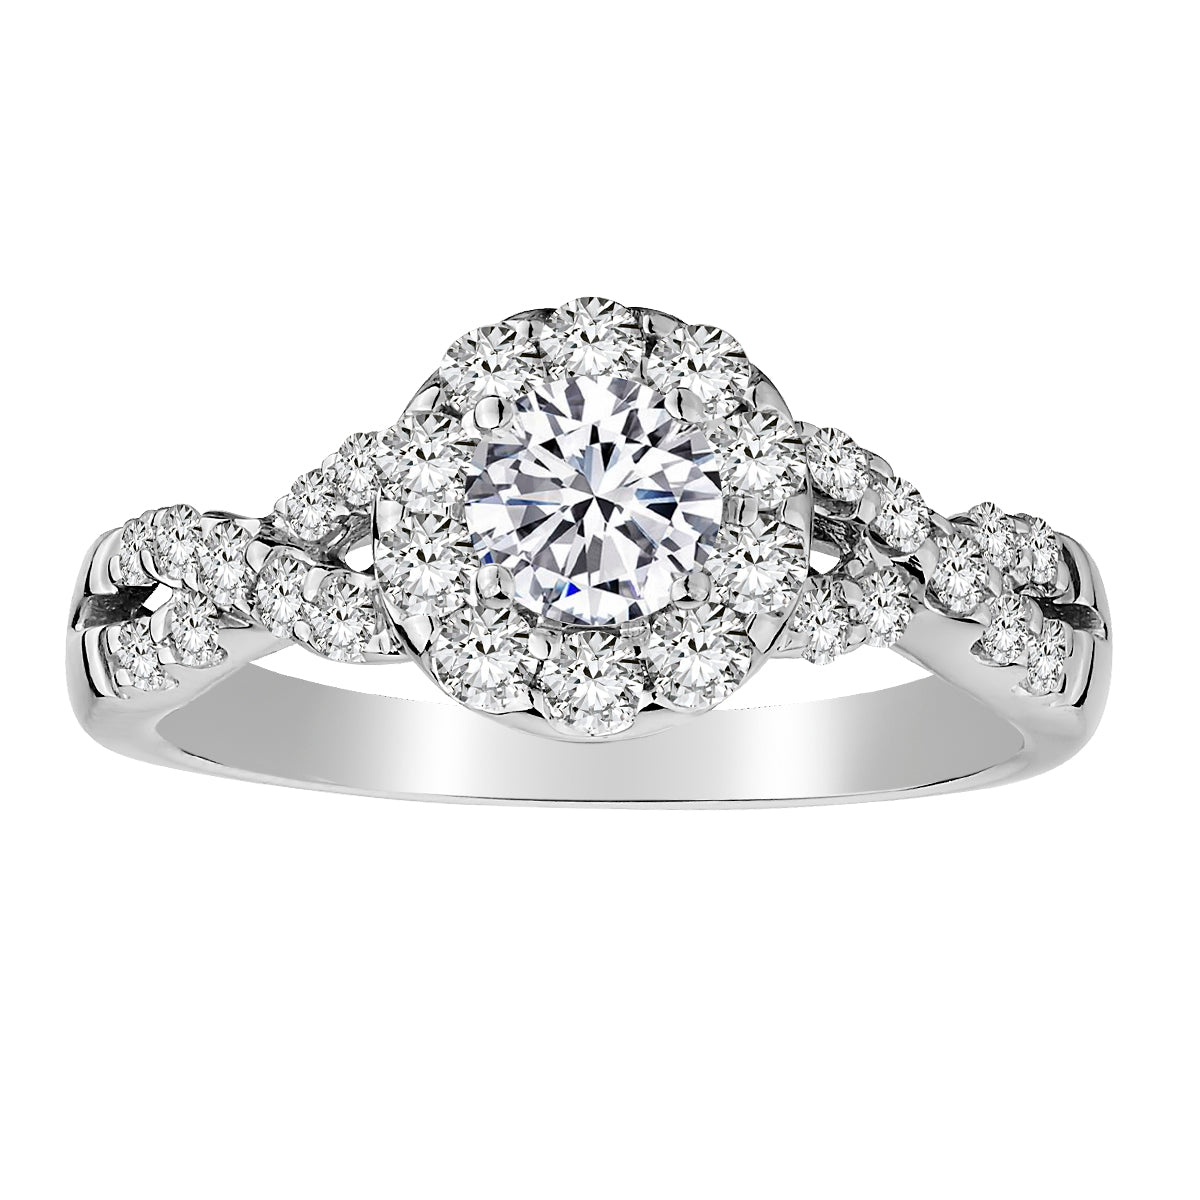 1.20 Carat Diamond Halo Engagement Ring,  14kt White Gold. Griffin Jewellery Designs